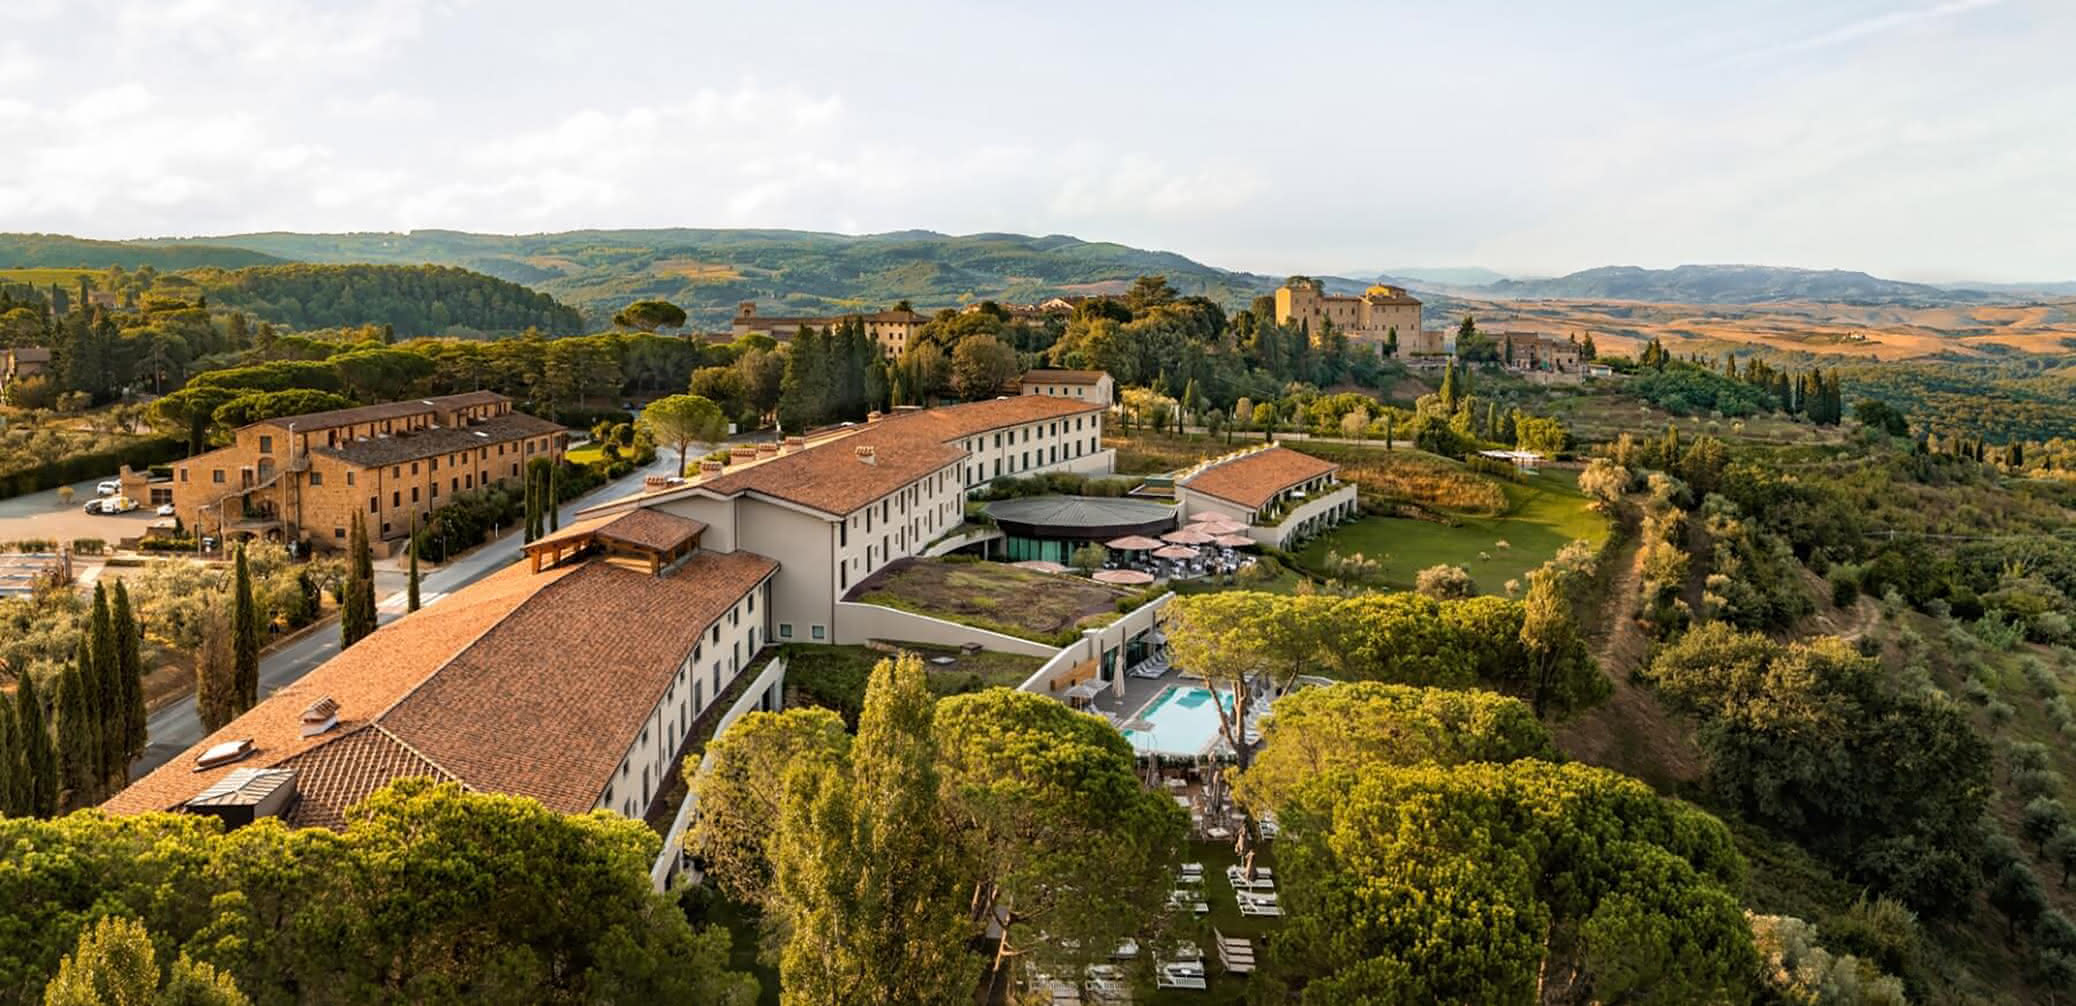 Is There A Ritz-Carlton Hotel in Tuscany?